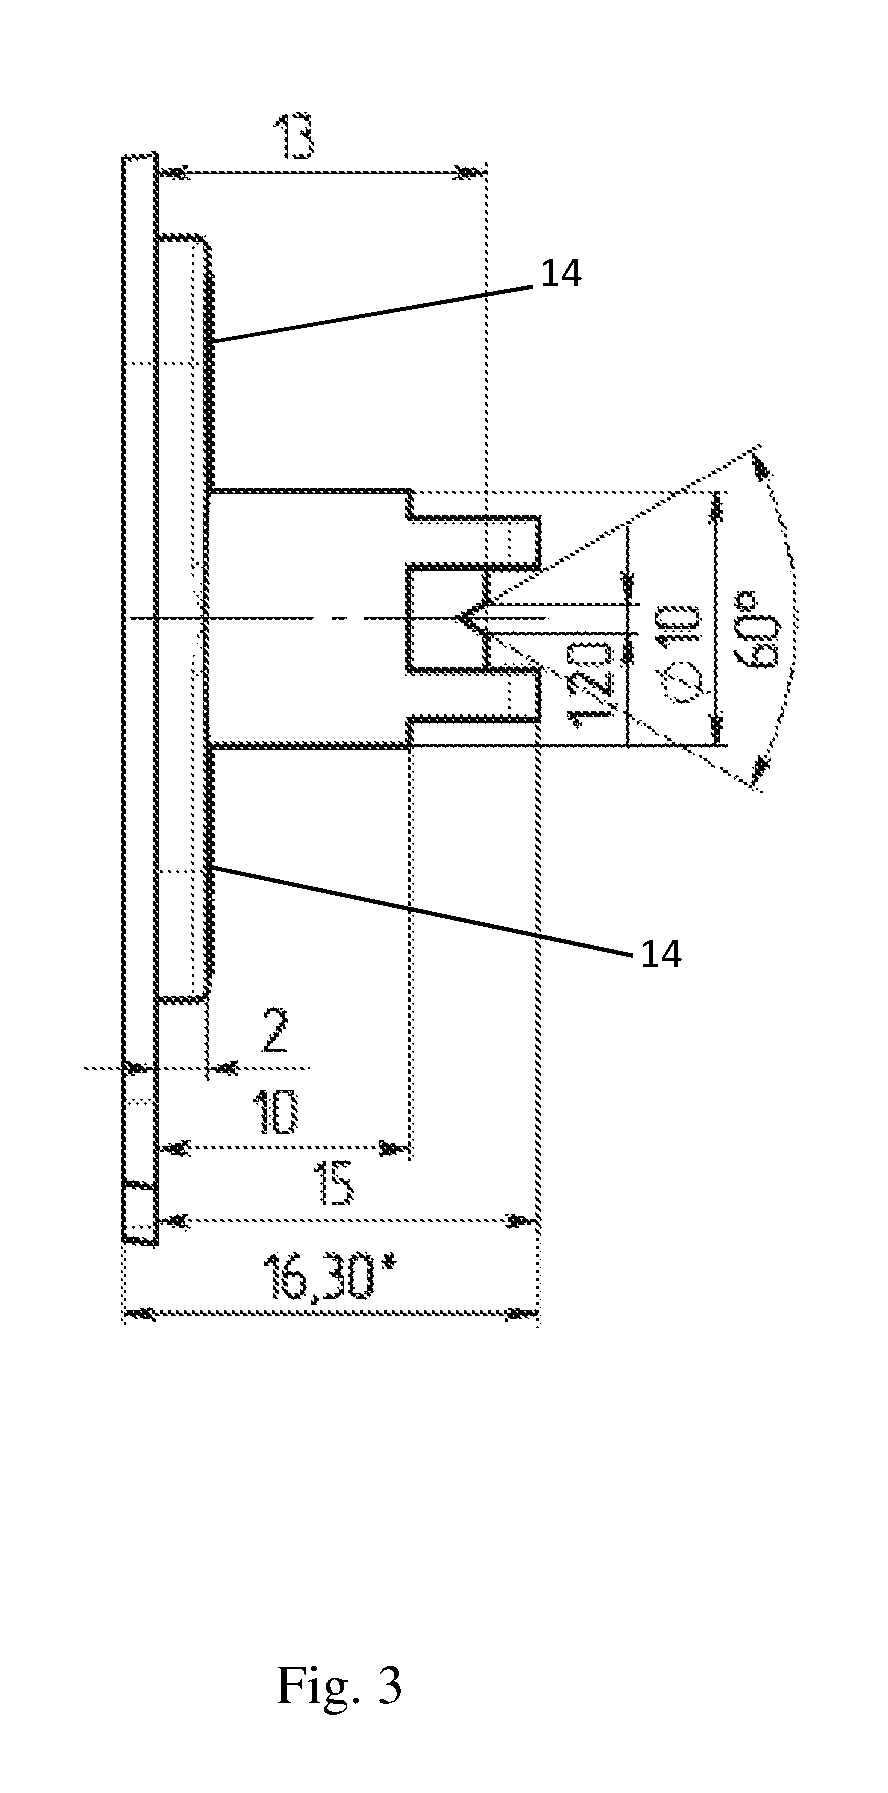 Device for spraying pressurized material